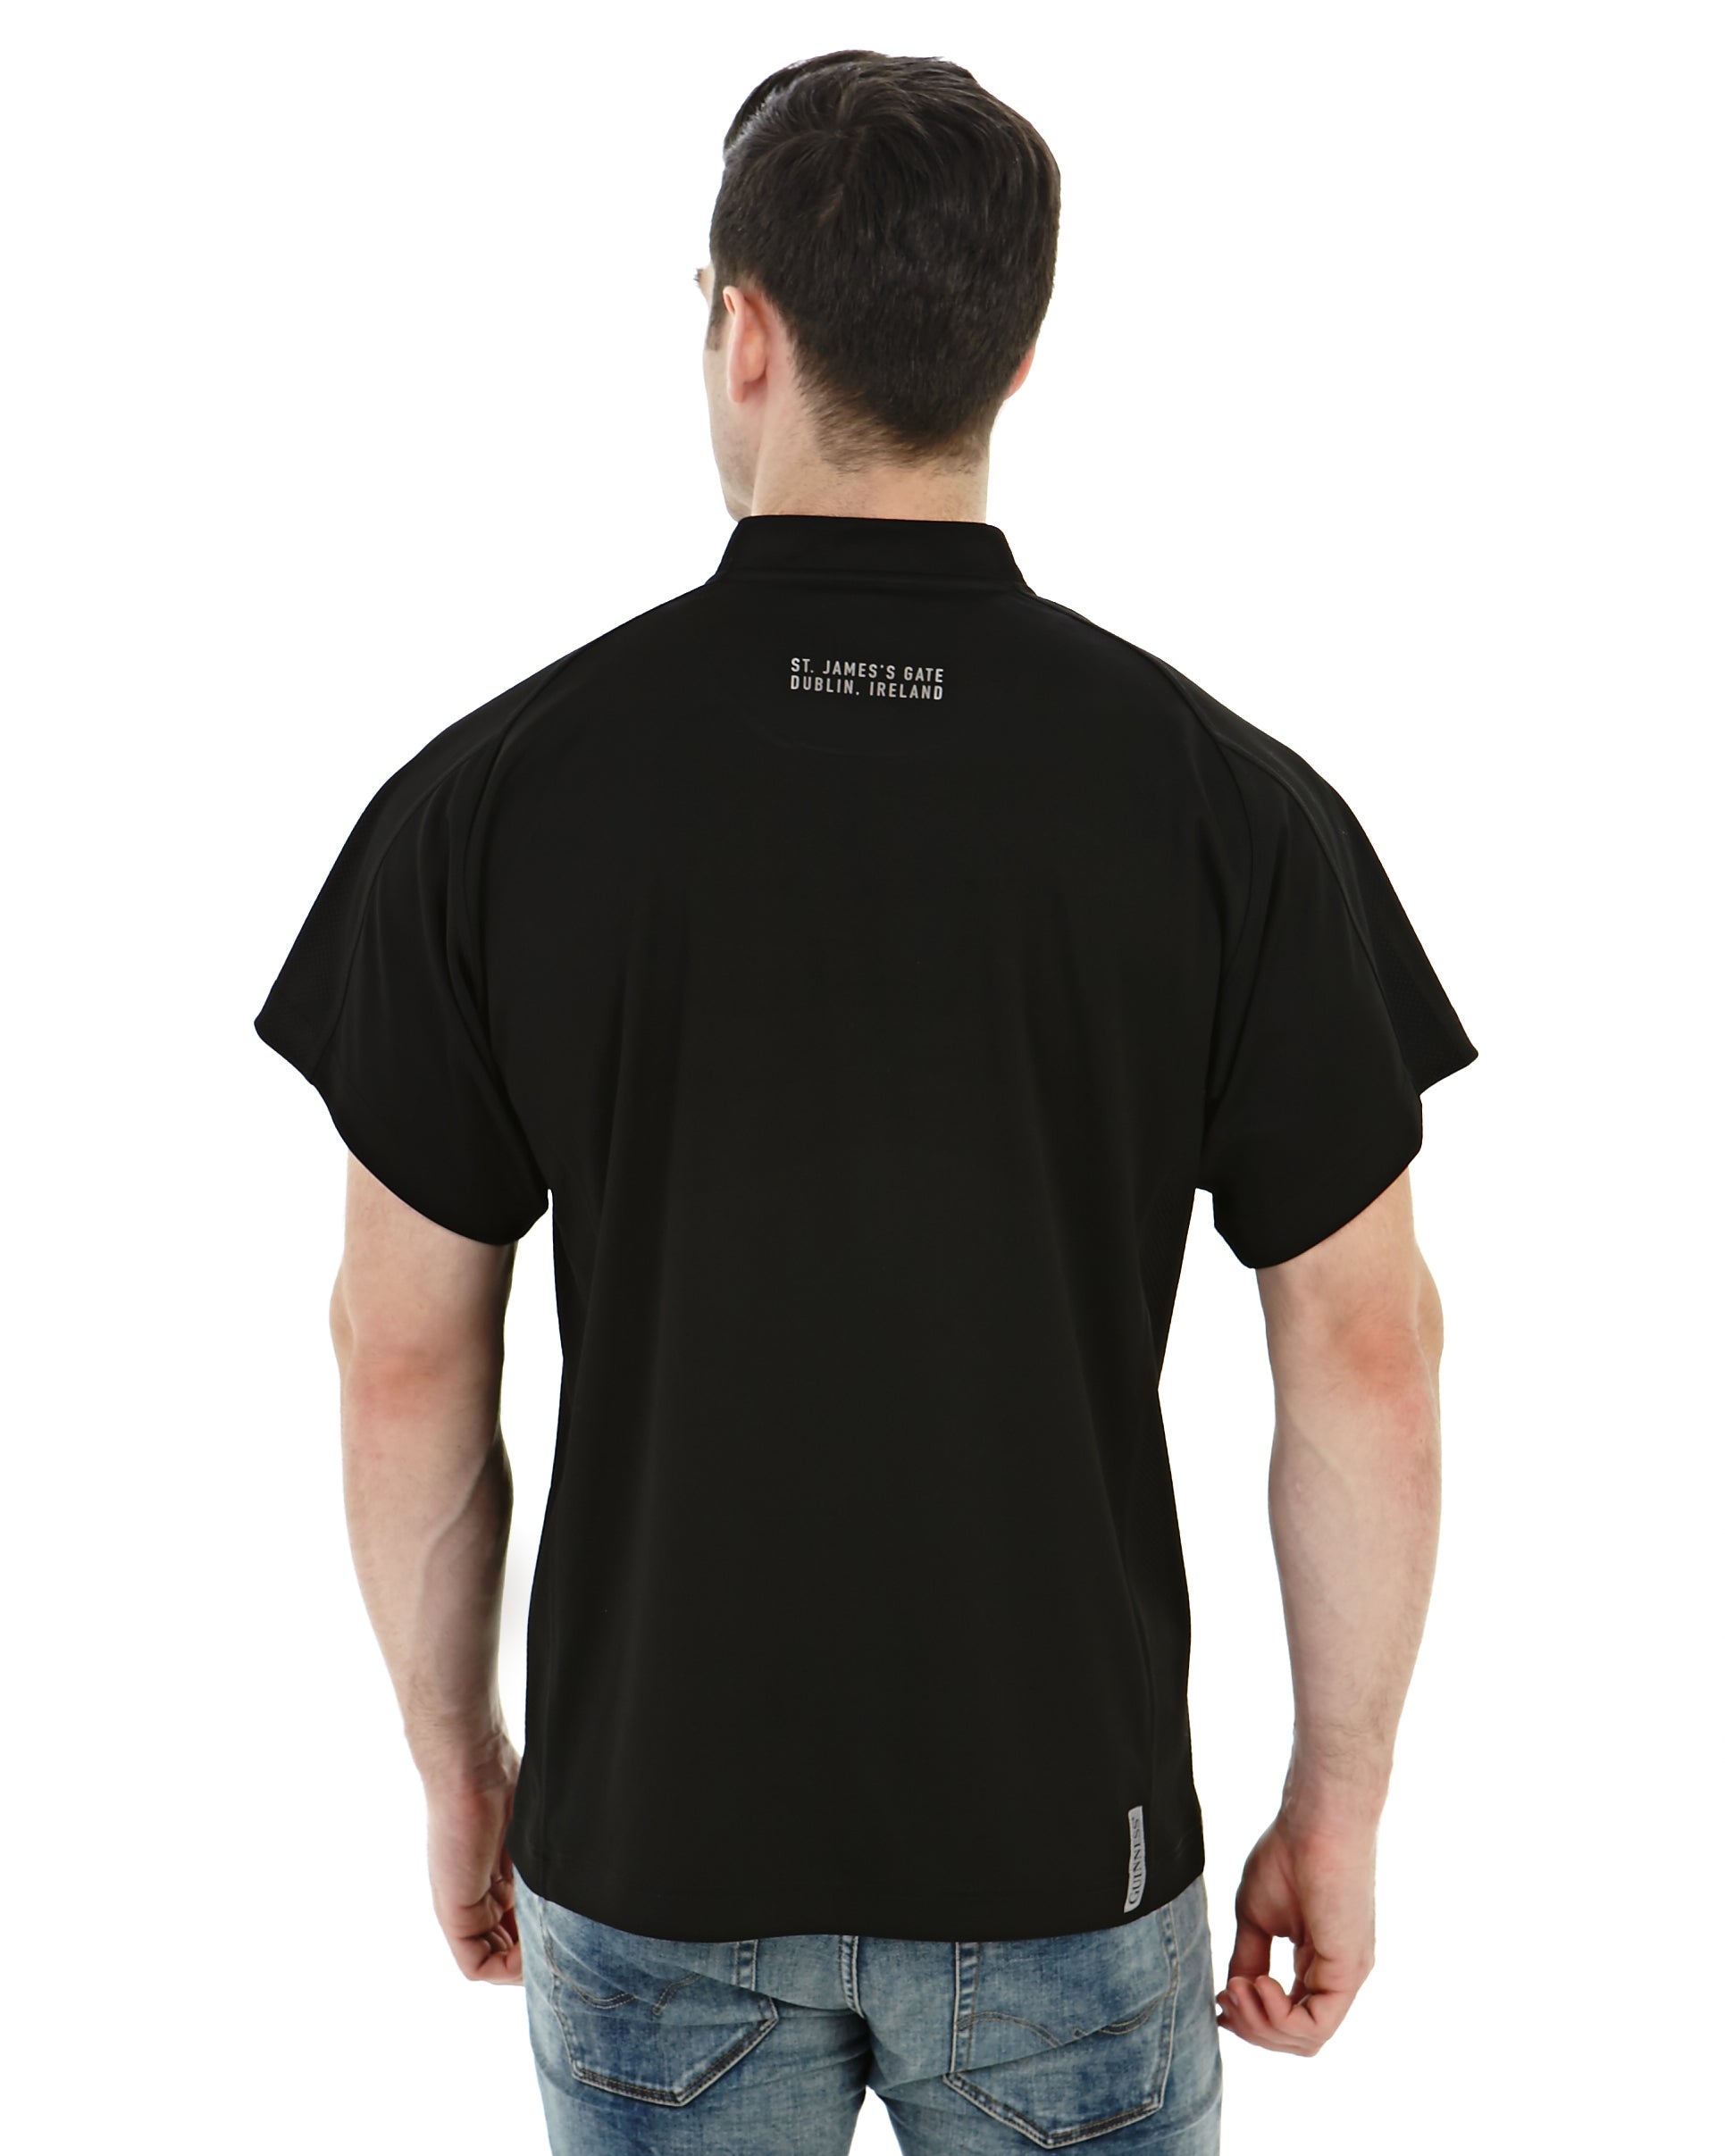 The back view of a man wearing a Guinness All Black Rugby Jersey.